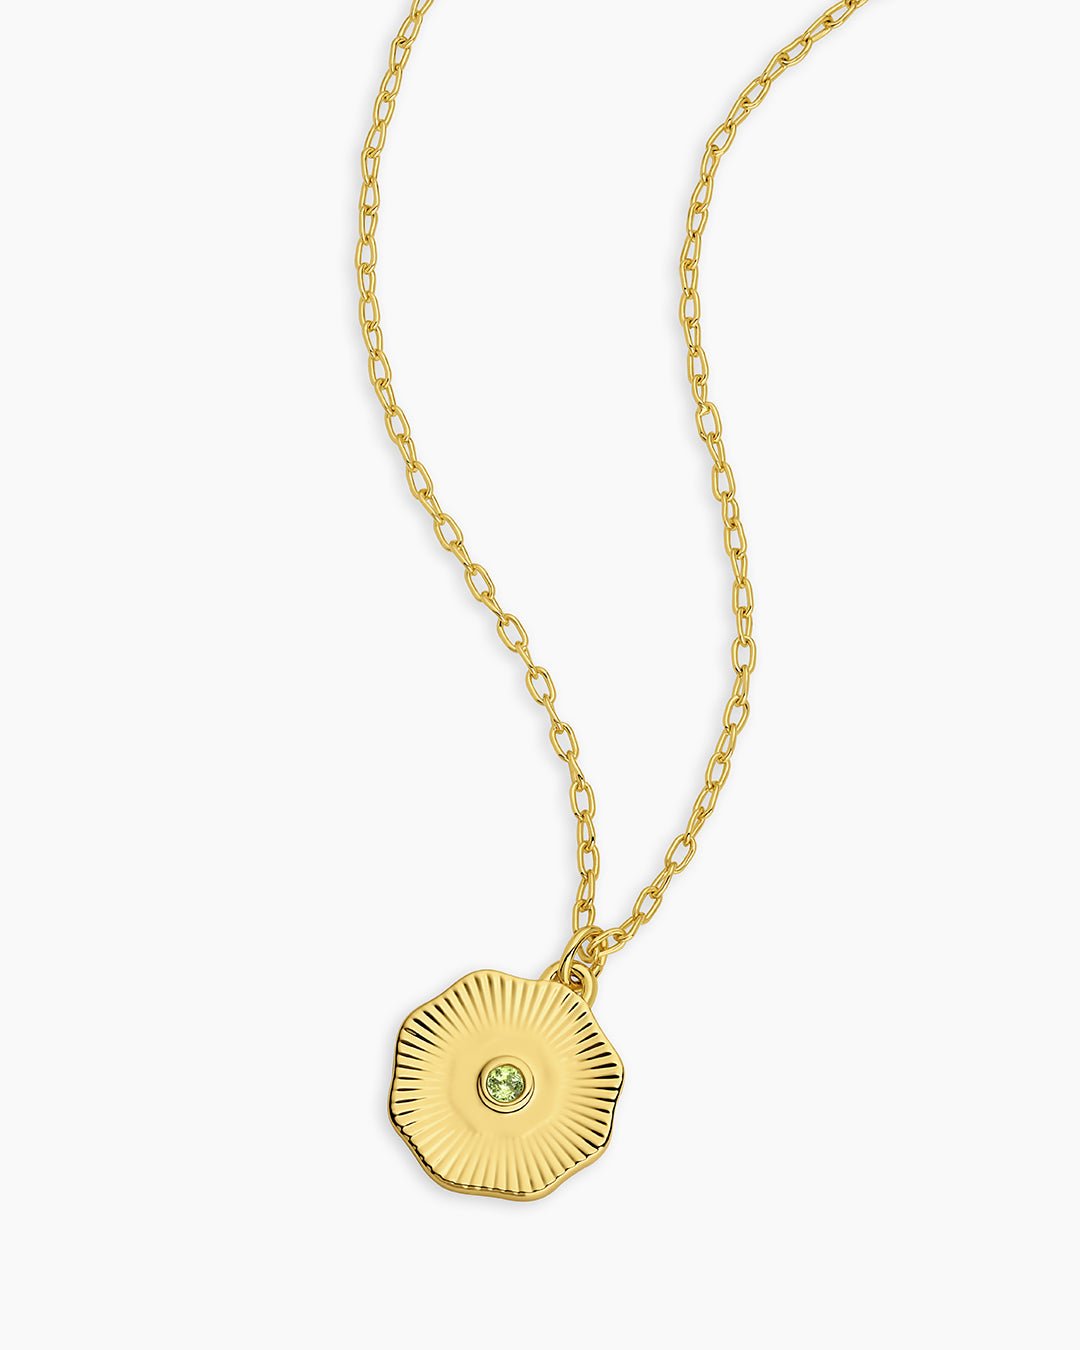 Birthstone Coin Necklace || option::Gold Plated, Peridot - August